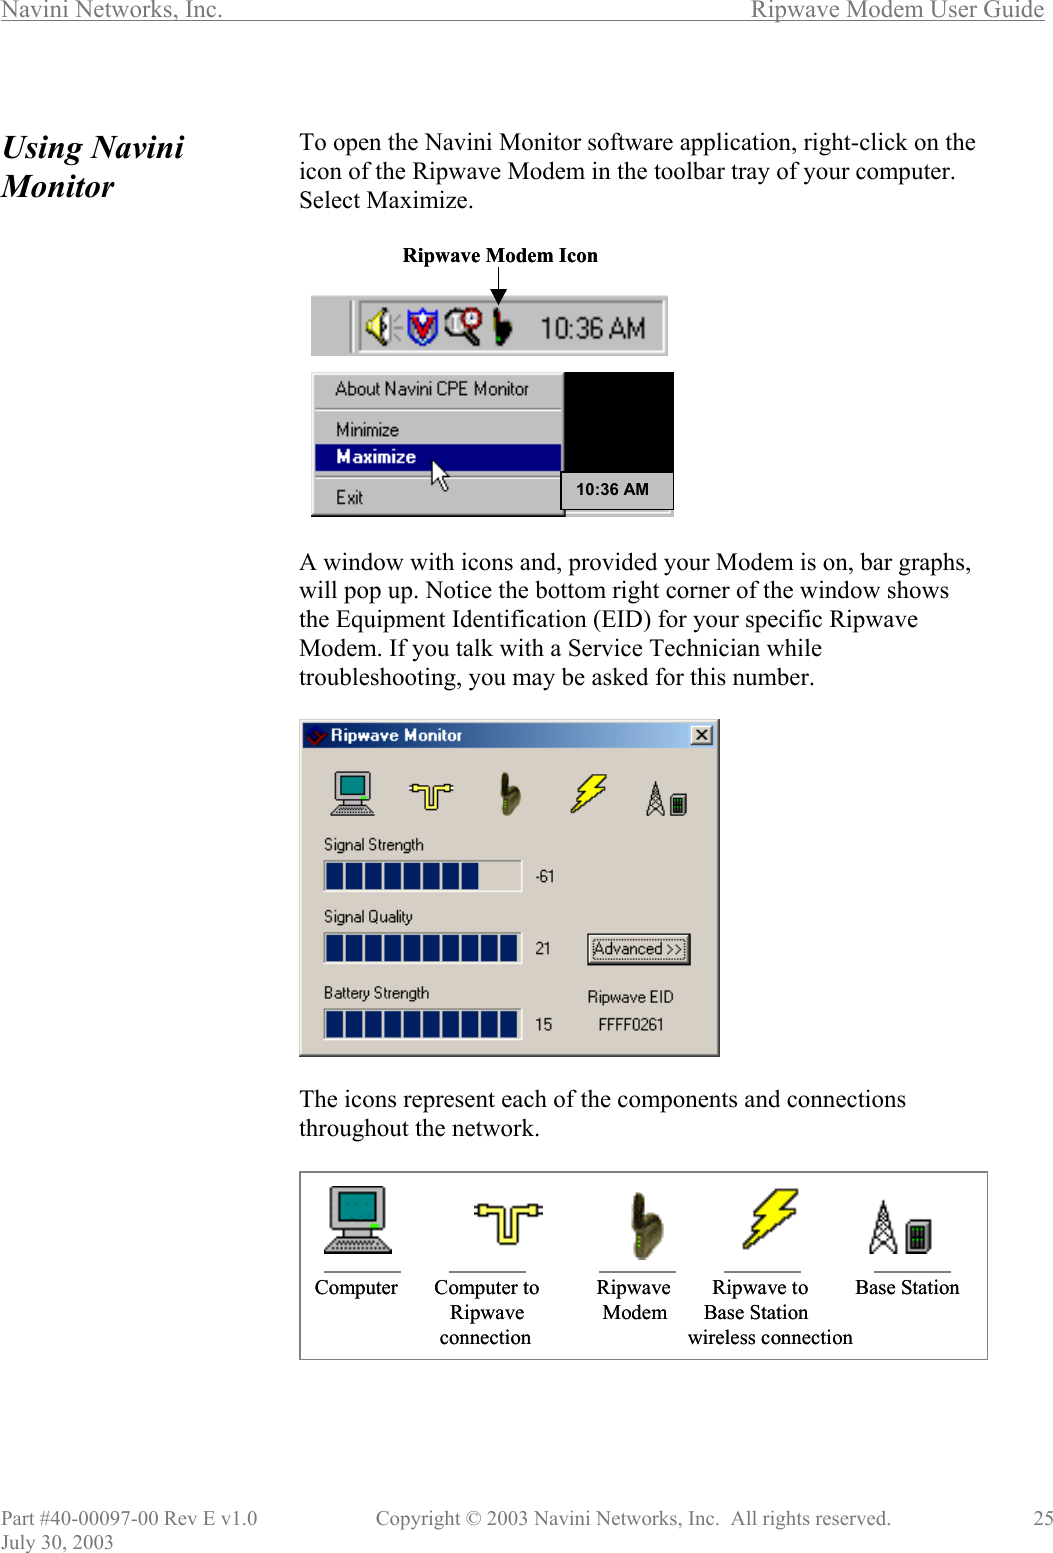 Navini Networks, Inc.        Ripwave Modem User Guide Part #40-00097-00 Rev E v1.0    Copyright © 2003 Navini Networks, Inc.  All rights reserved.               25 July 30, 2003  Using Navini Monitor                                             To open the Navini Monitor software application, right-click on the icon of the Ripwave Modem in the toolbar tray of your computer. Select Maximize.    A window with icons and, provided your Modem is on, bar graphs, will pop up. Notice the bottom right corner of the window shows the Equipment Identification (EID) for your specific Ripwave Modem. If you talk with a Service Technician while troubleshooting, you may be asked for this number.   The icons represent each of the components and connections throughout the network.      Ripwave Modem Icon 10:36 AMRipwave Modem Icon 10:36 AMComputer       Computer to           Ripwave        Ripwave to   Base StationRipwave               Modem       Base Stationconnection                              wireless connection Computer       Computer to           Ripwave        Ripwave to   Base StationRipwave               Modem       Base Stationconnection                              wireless connection 